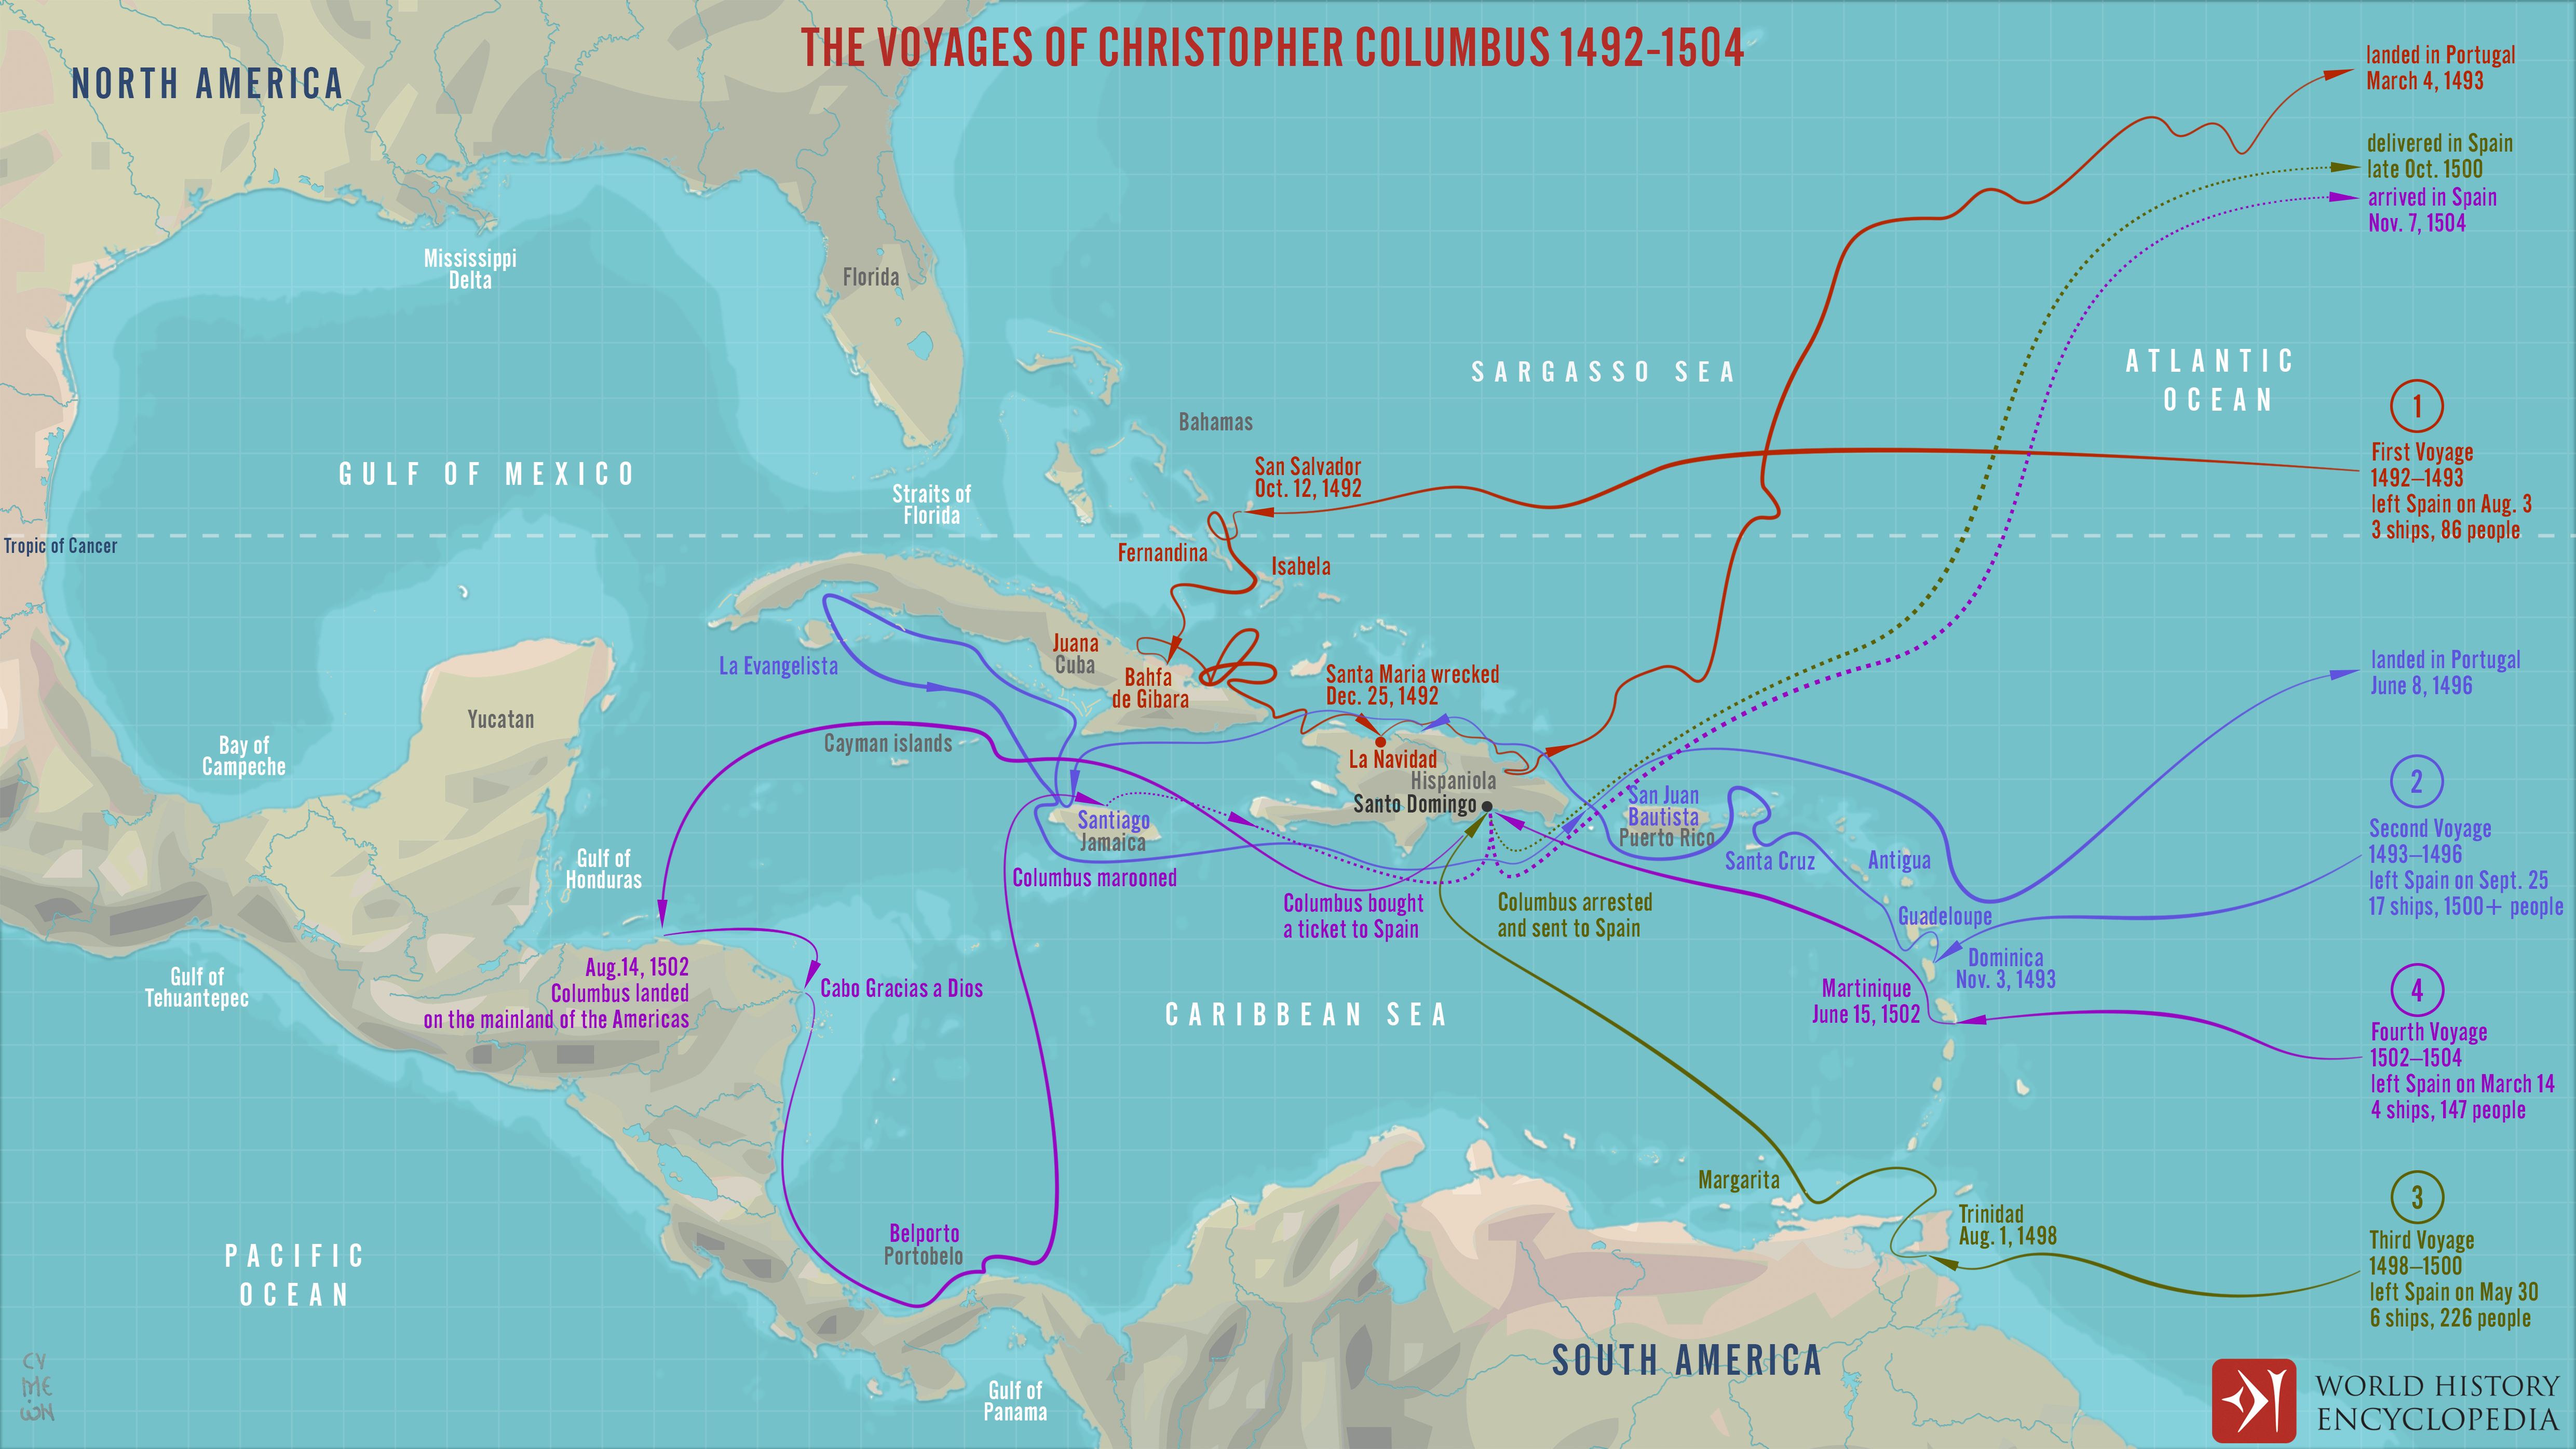 Routes of three voyages along the Caribbean islands, northern South America, and eastern Central America 